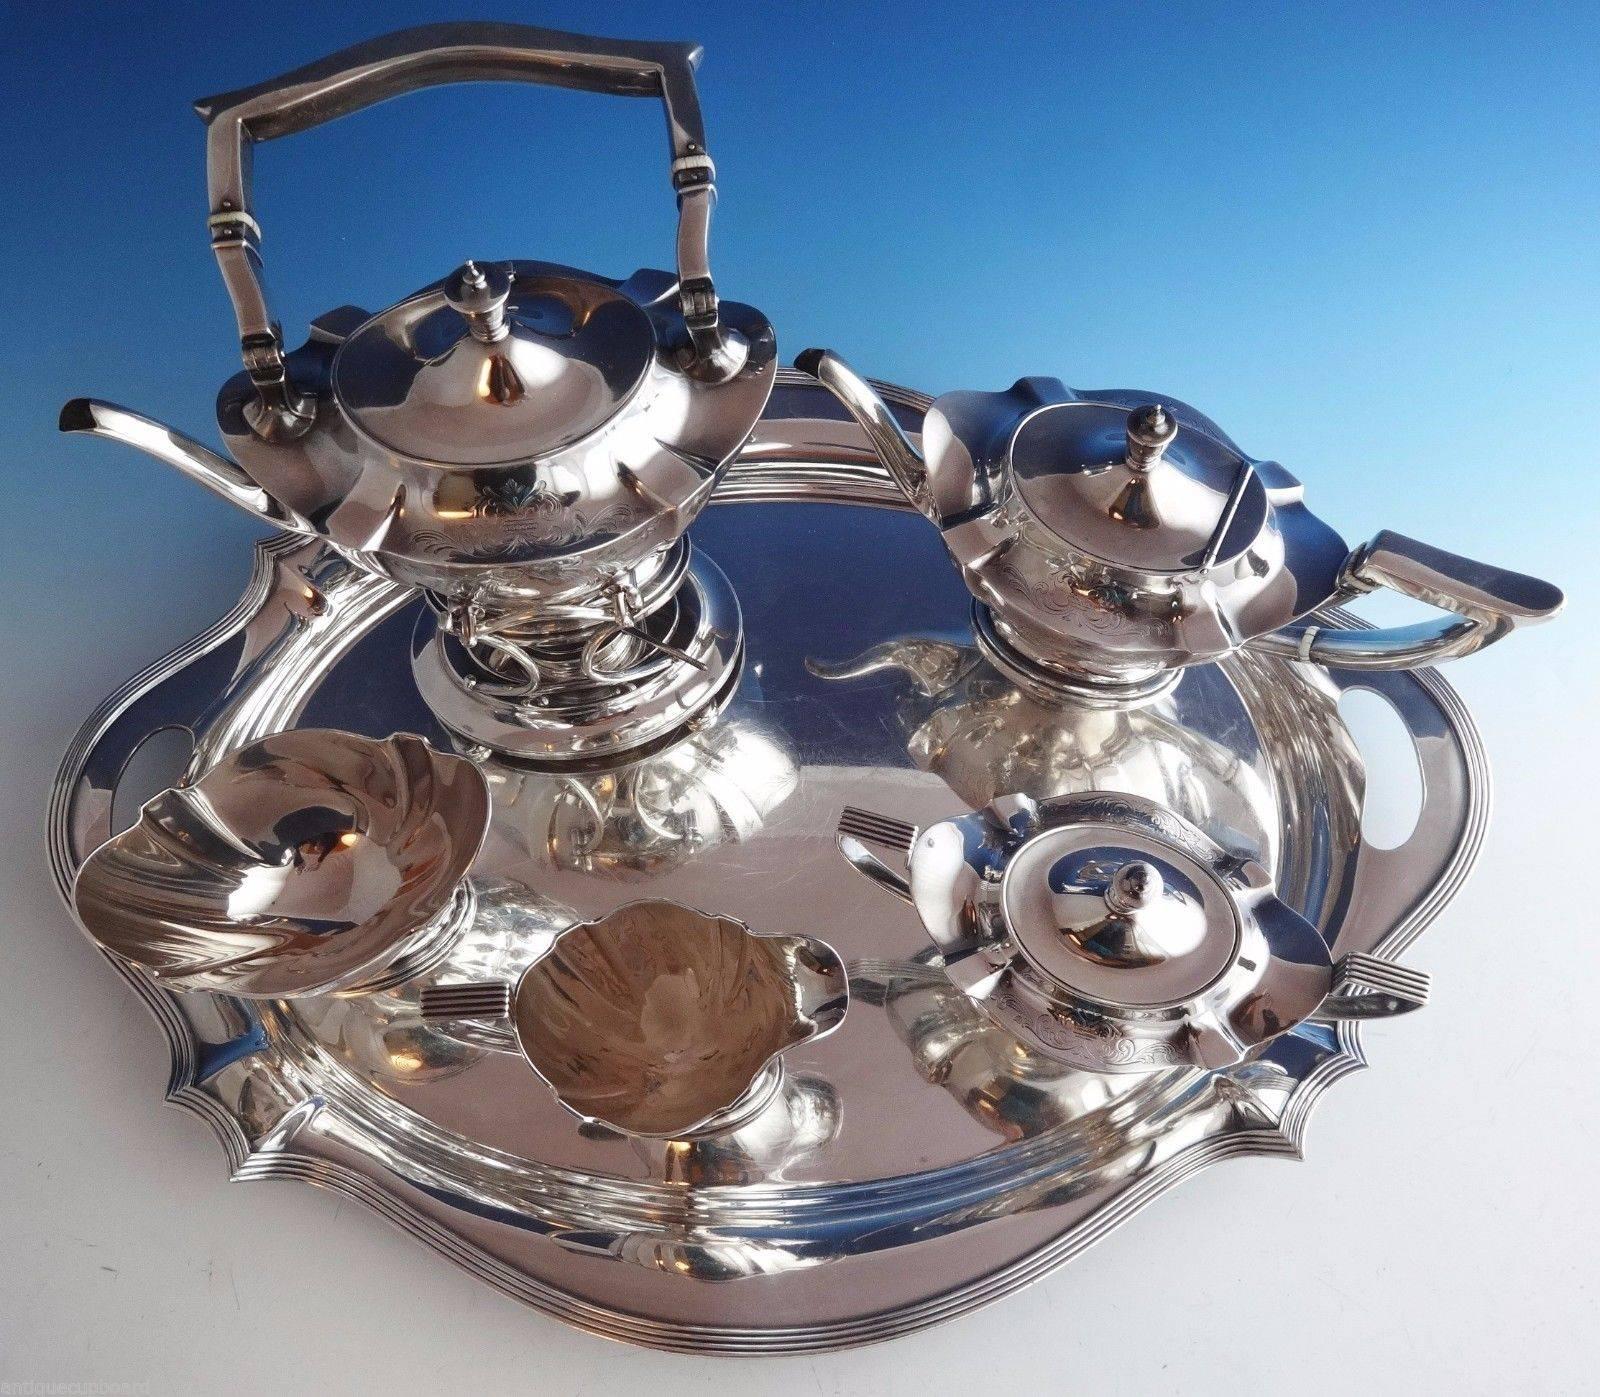 Plymouth Engraved by Gorham.

Impressive plymouth engraved by Gorham sterling silver five-piece tea set with silver plate tray. It features beautiful engraved scrollwork. The set includes:

Kettle on stand: Marked with #A2446, holds 2 3/4 pints, and